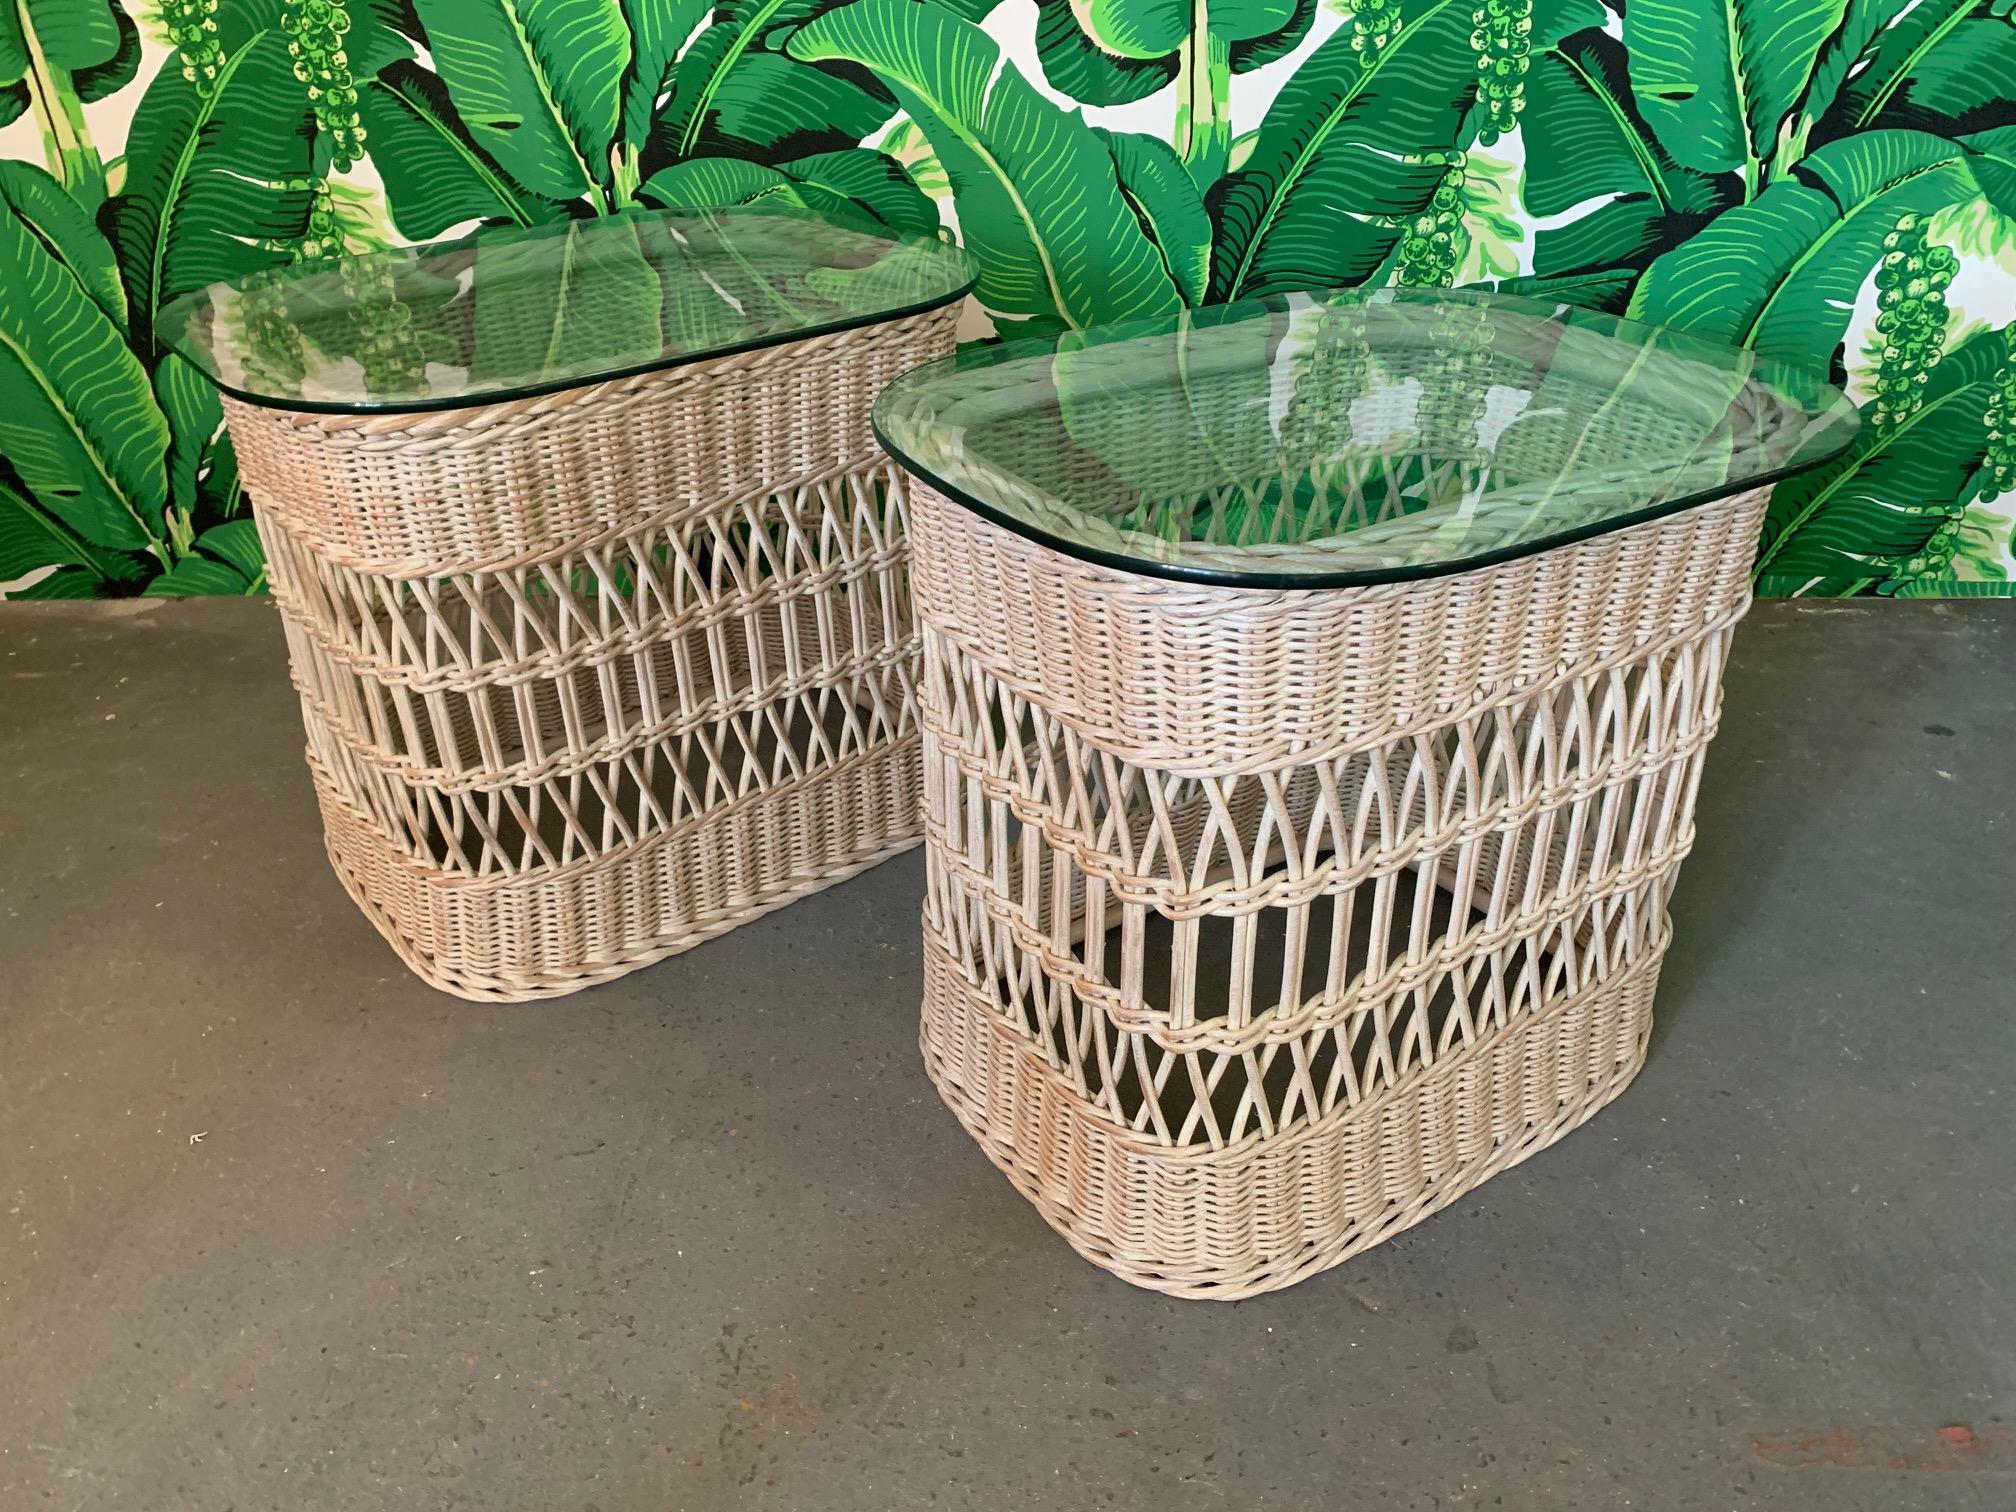 Pair of rattan side tables feature woven rattan and wicker base with glass top. Very good condition with only minor imperfections consistent with age. Bases are identical. One glass measures 26